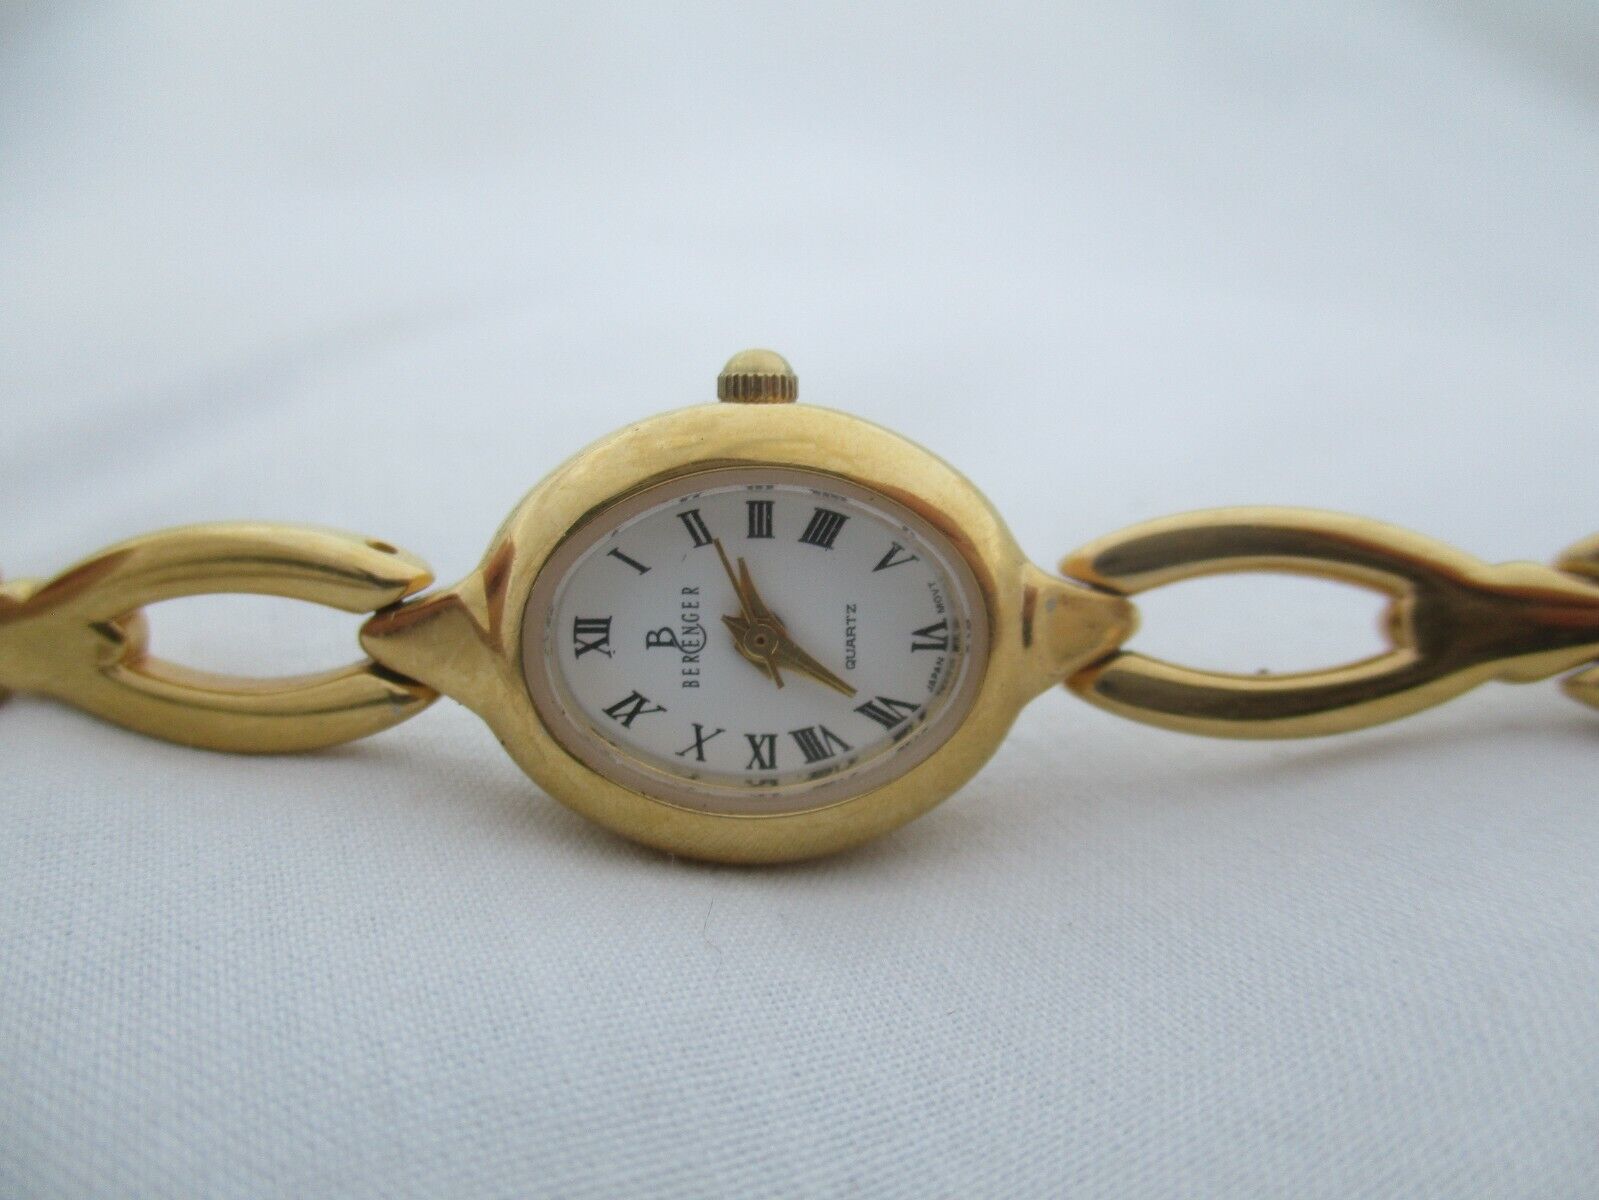 Berenger Wristwatch Gold Tone Band Oval Shaped White Face Roman Numerals